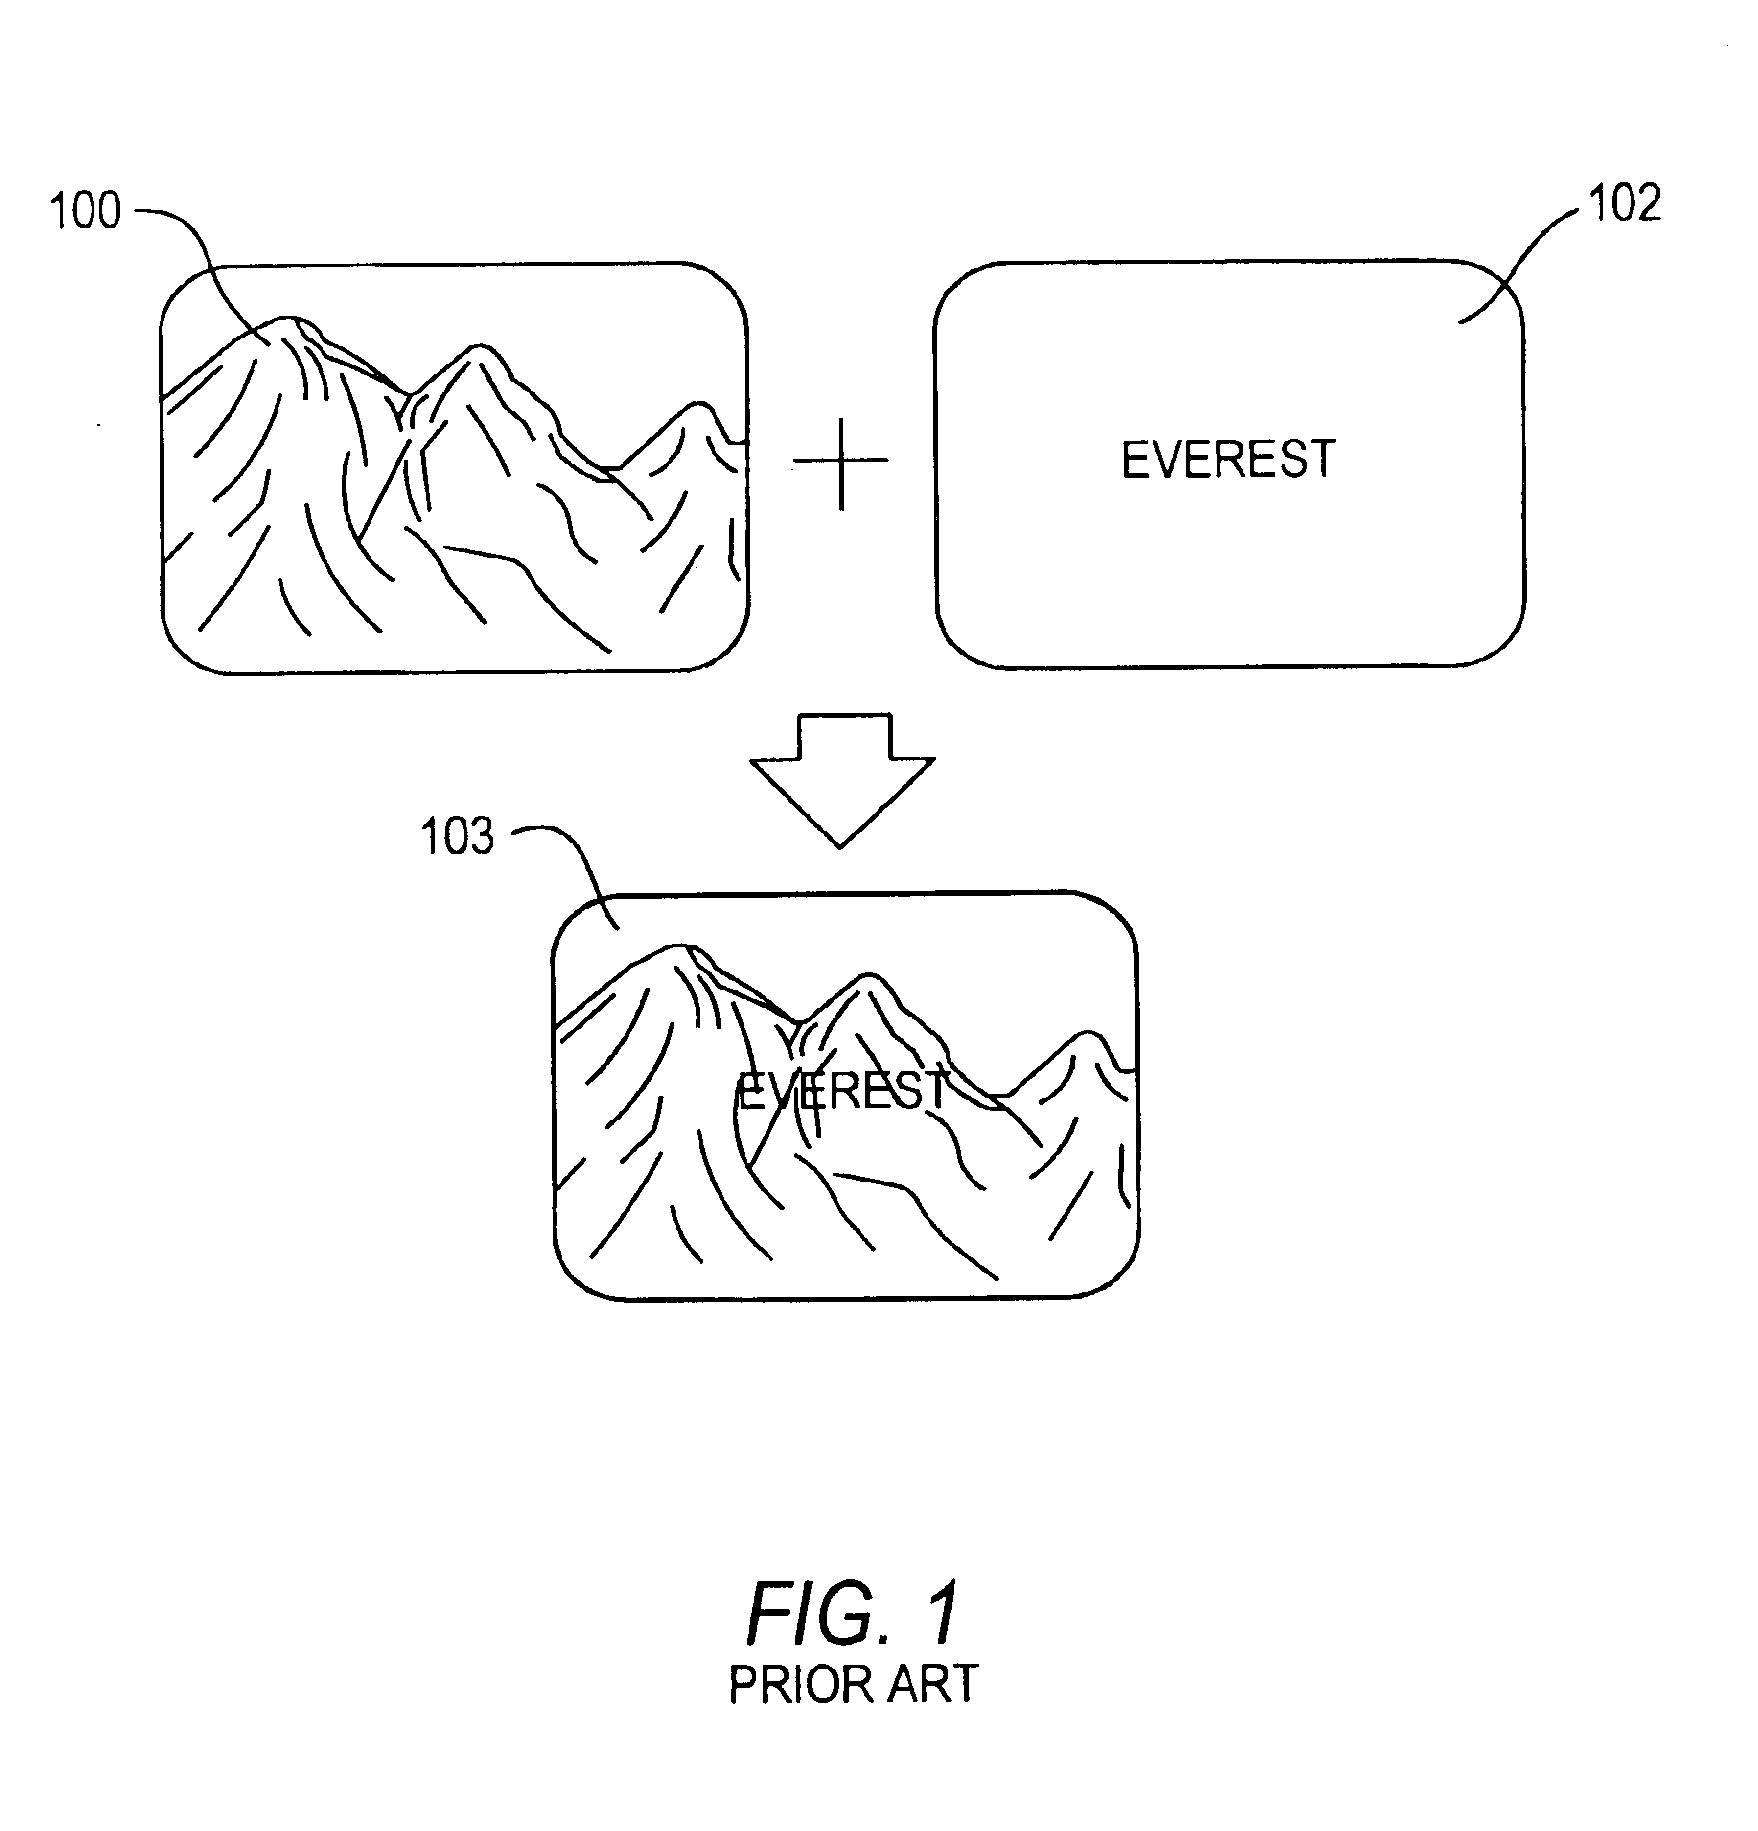 Apparatus and methods for voice titles